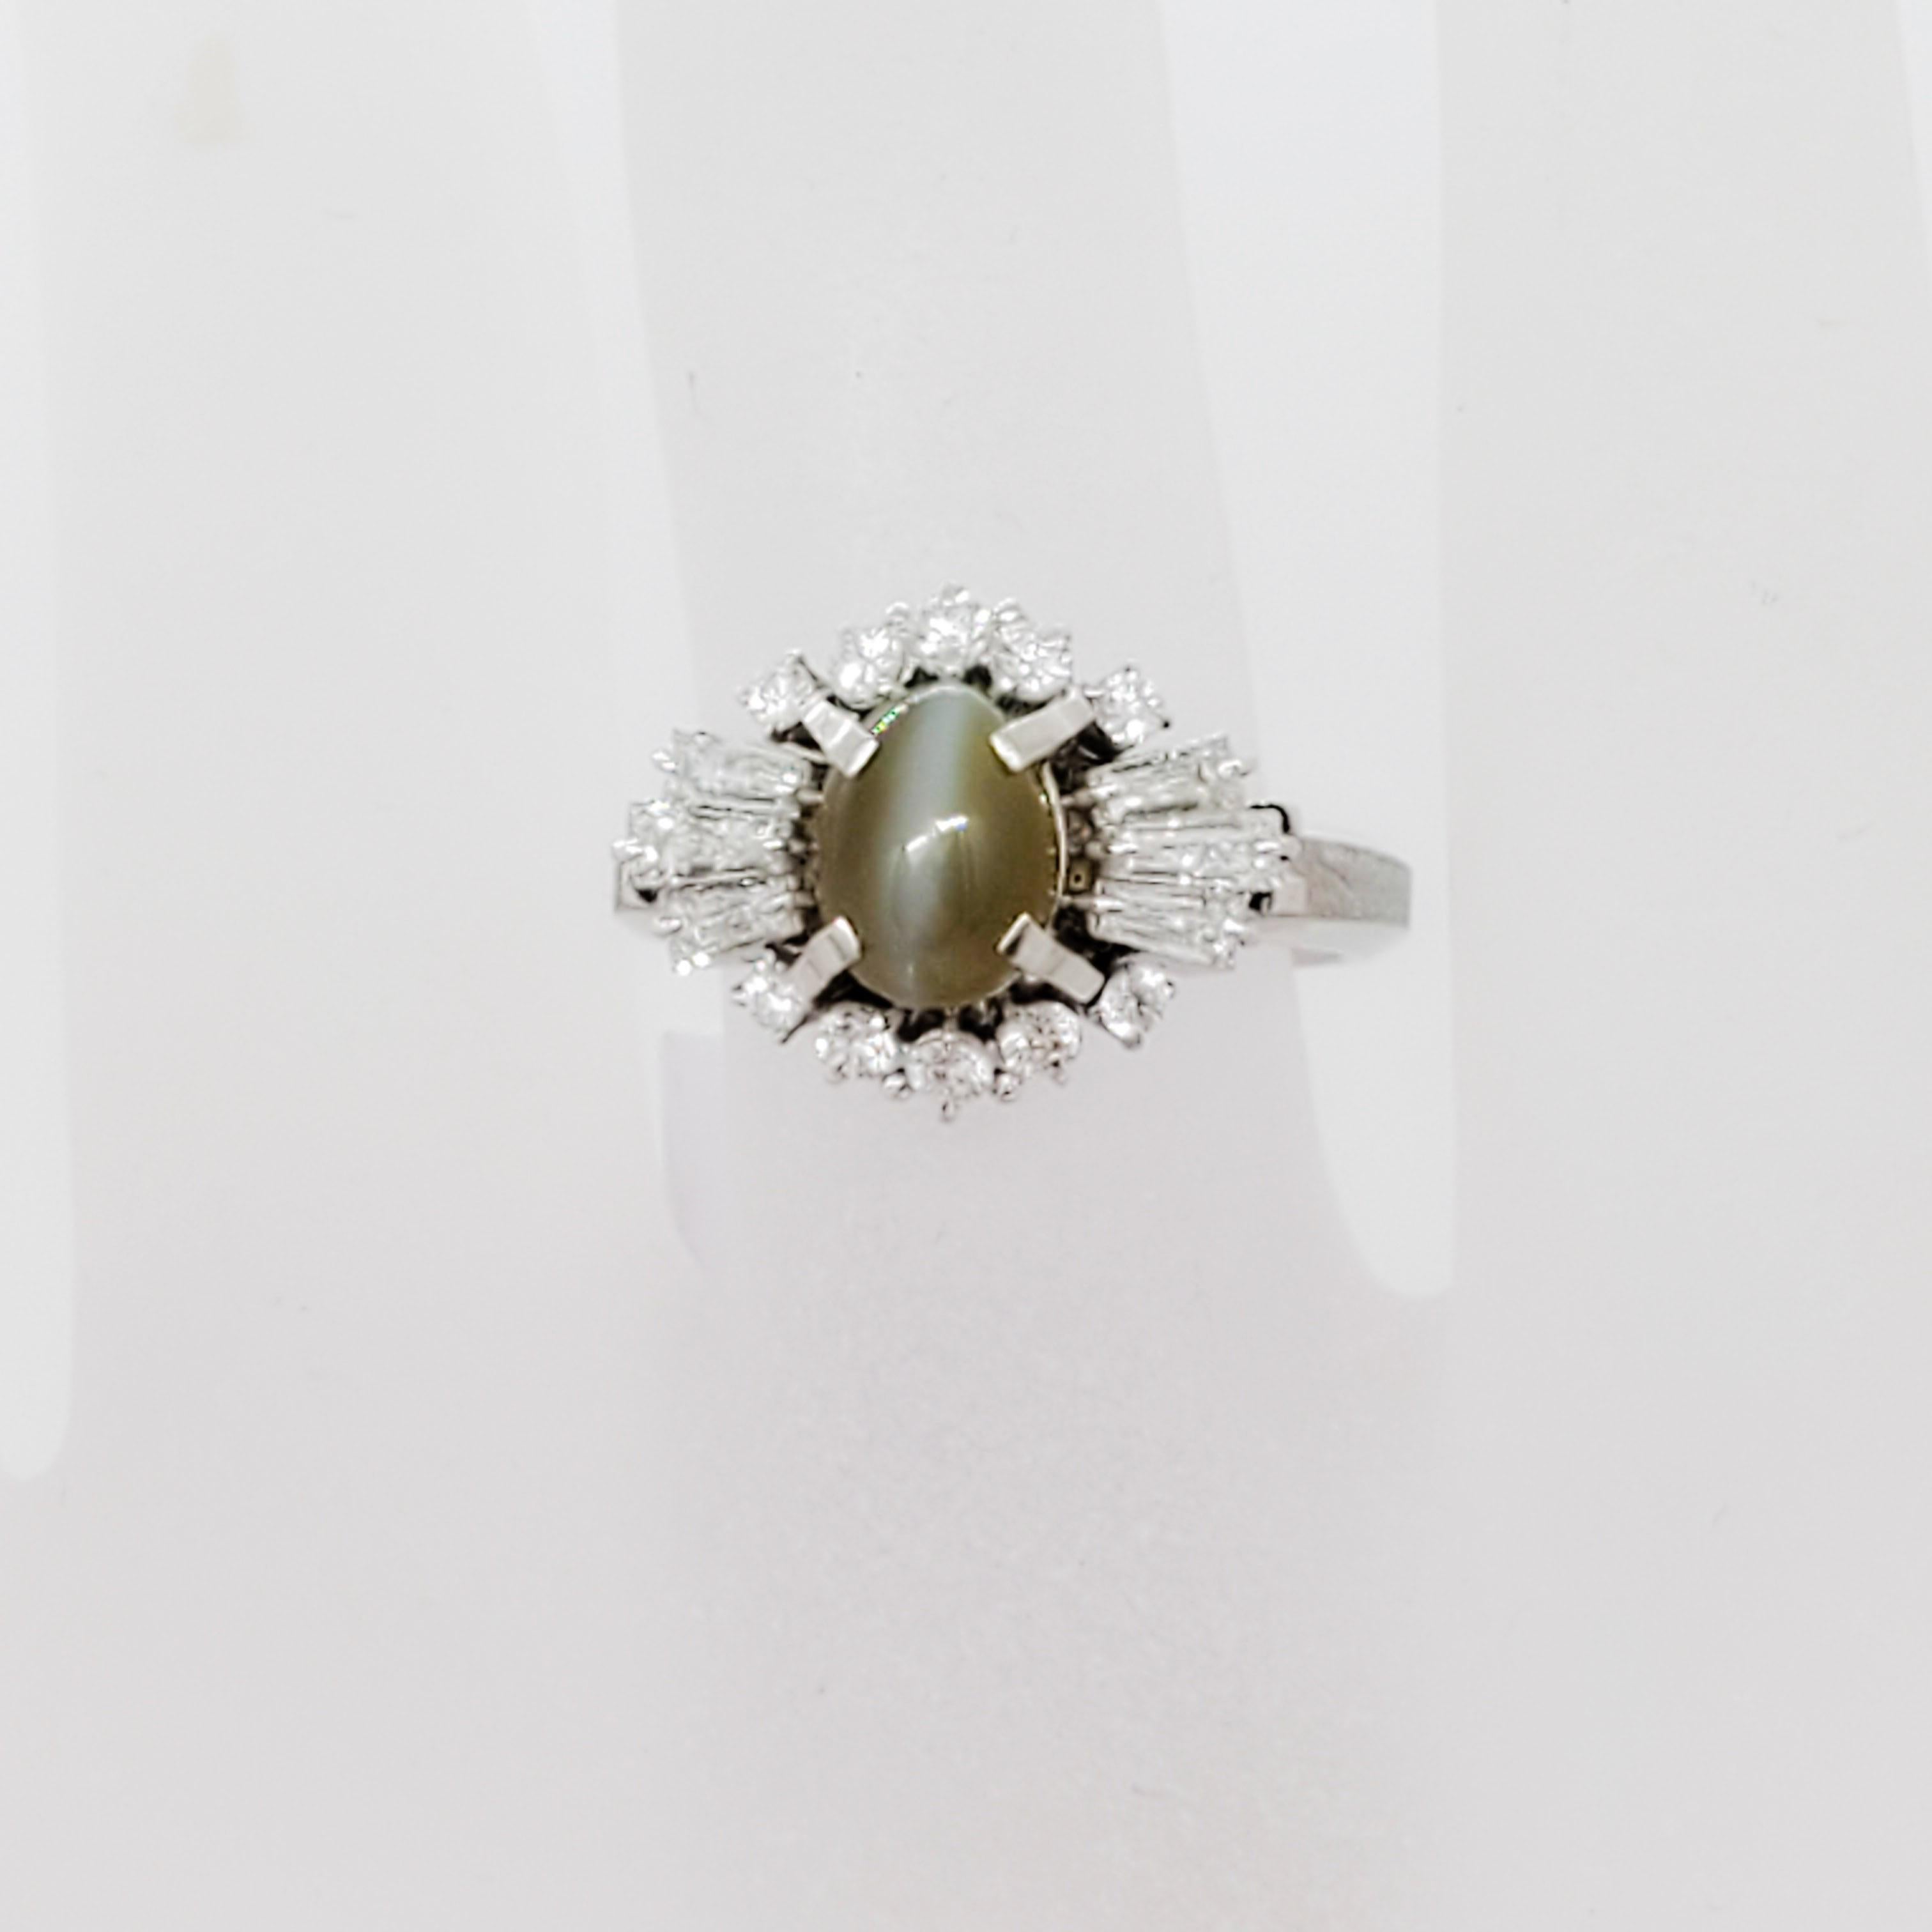 Oval Cut Cat's Eye Chrysoberyl Oval Cabochon and White Diamond Cocktail Ring For Sale